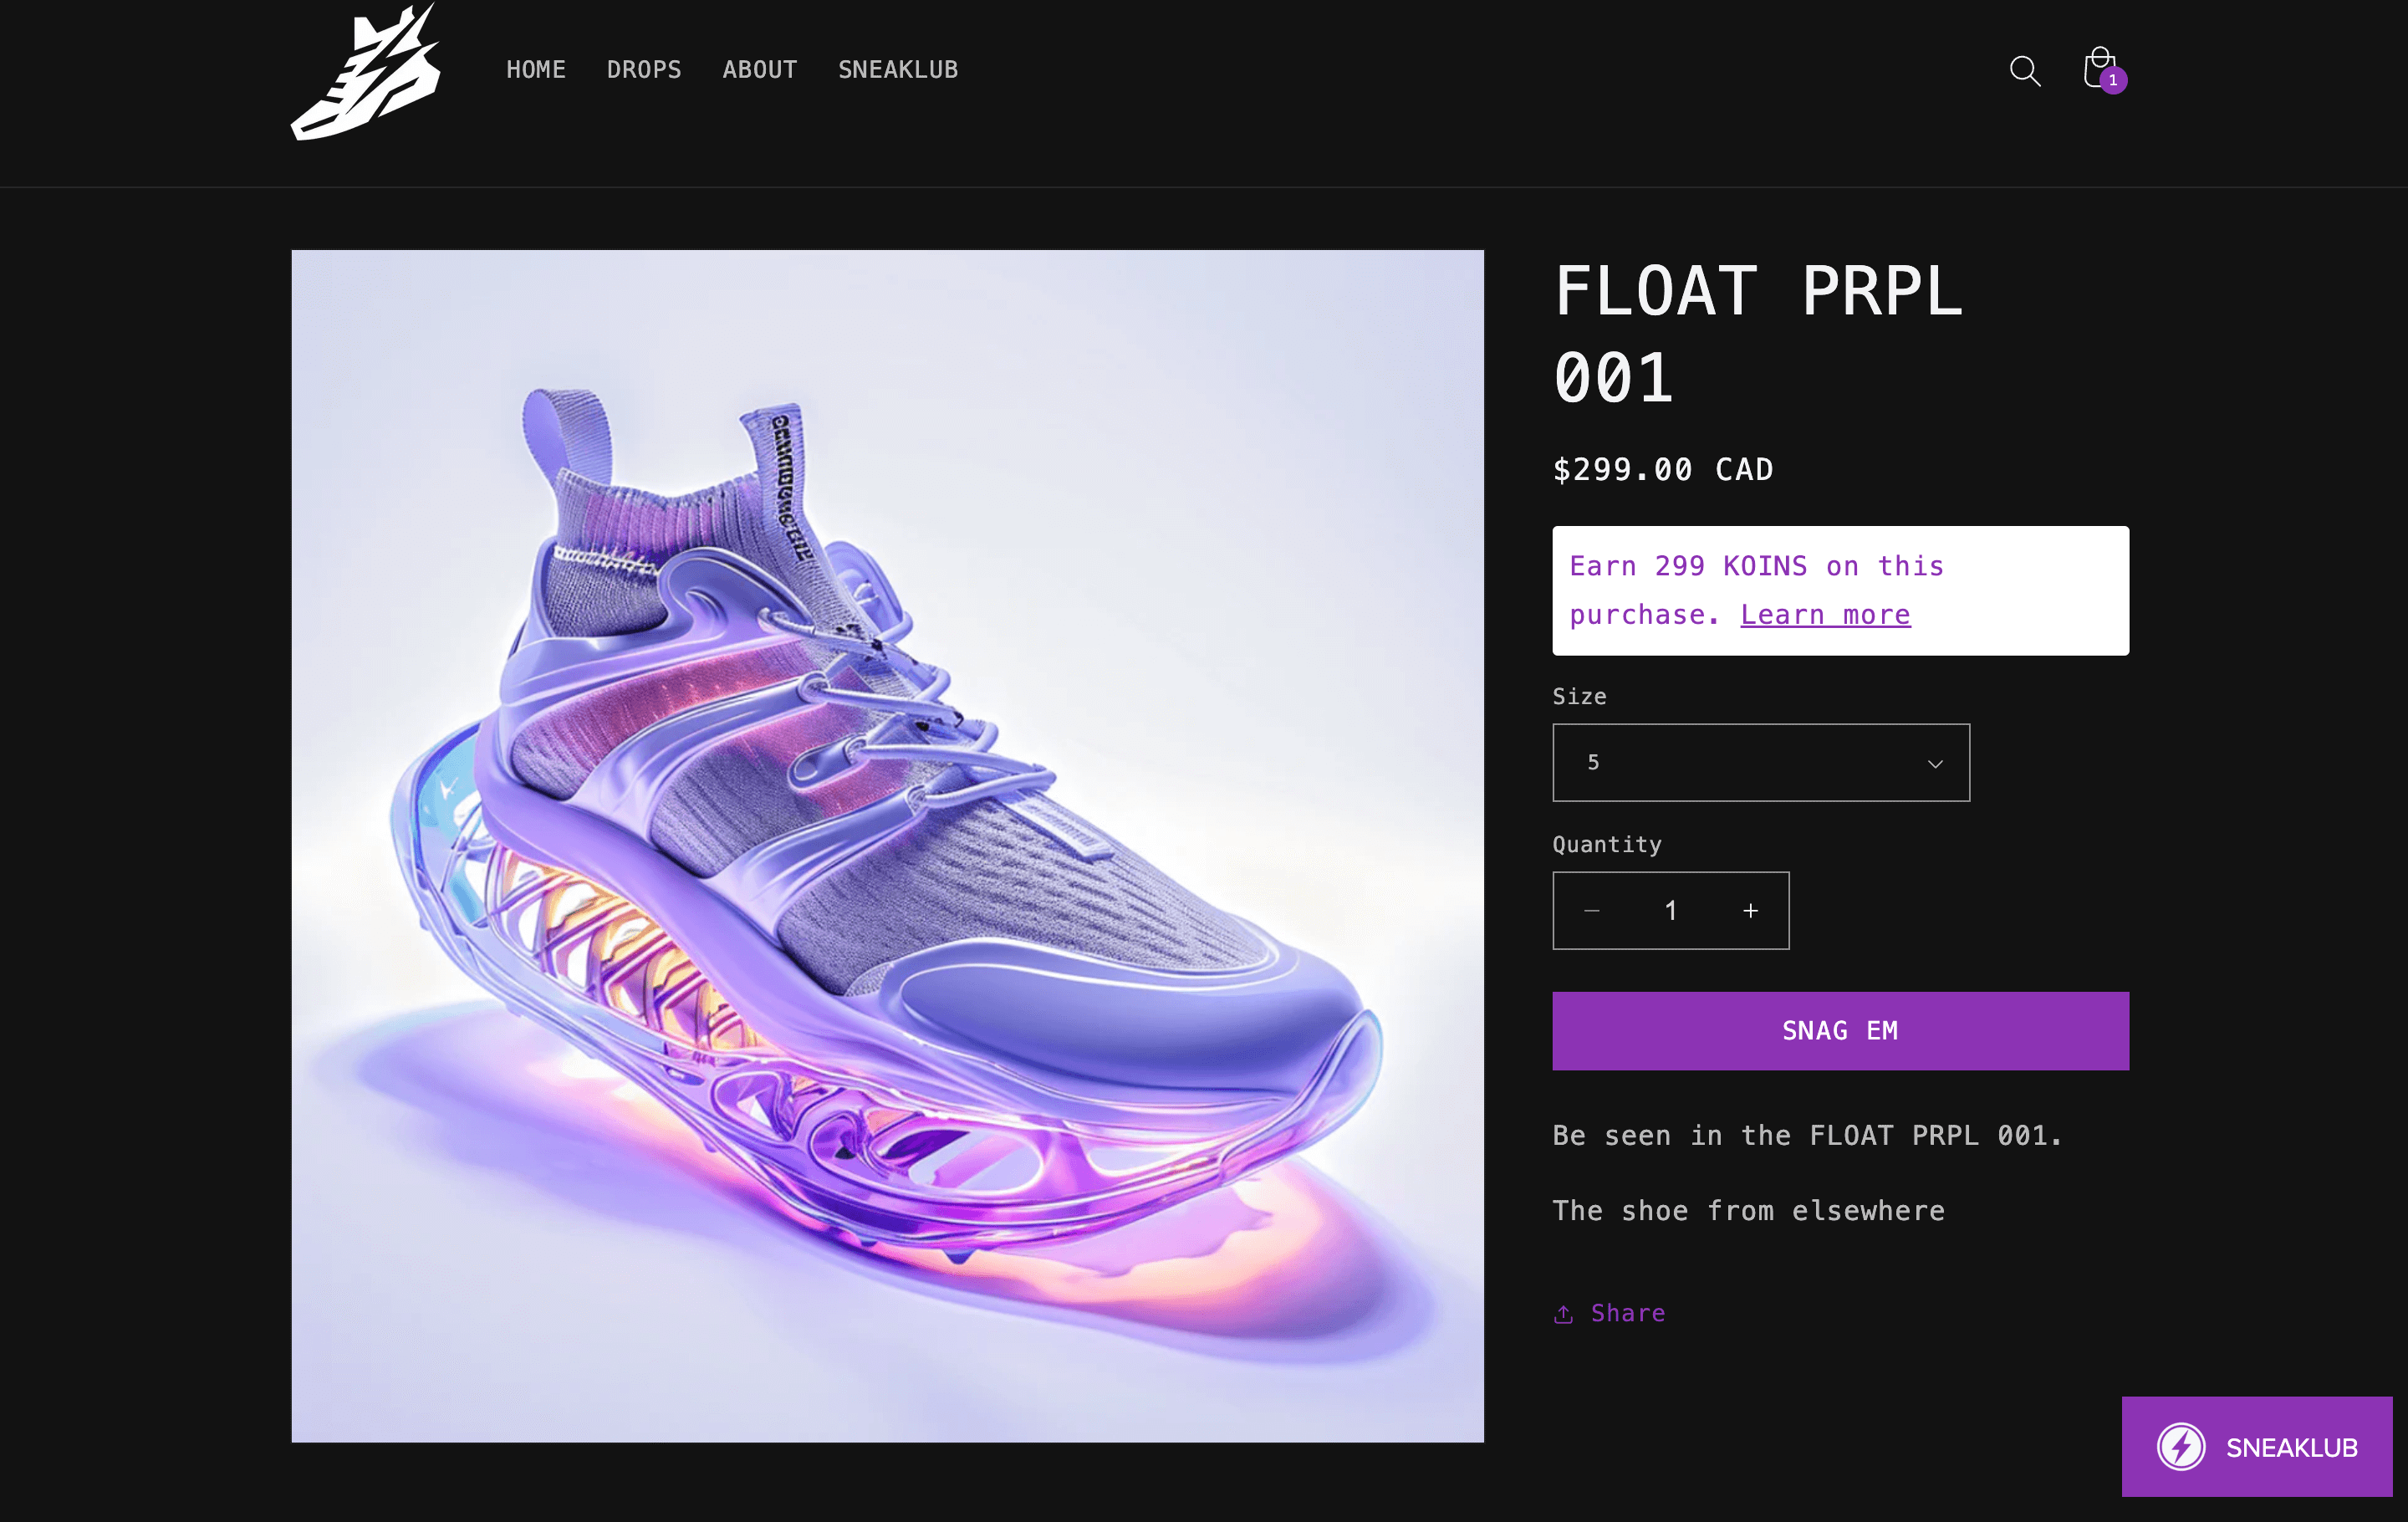 A screenshot of a sneaker product page showing that customers could earn 299 points on that purchase. 